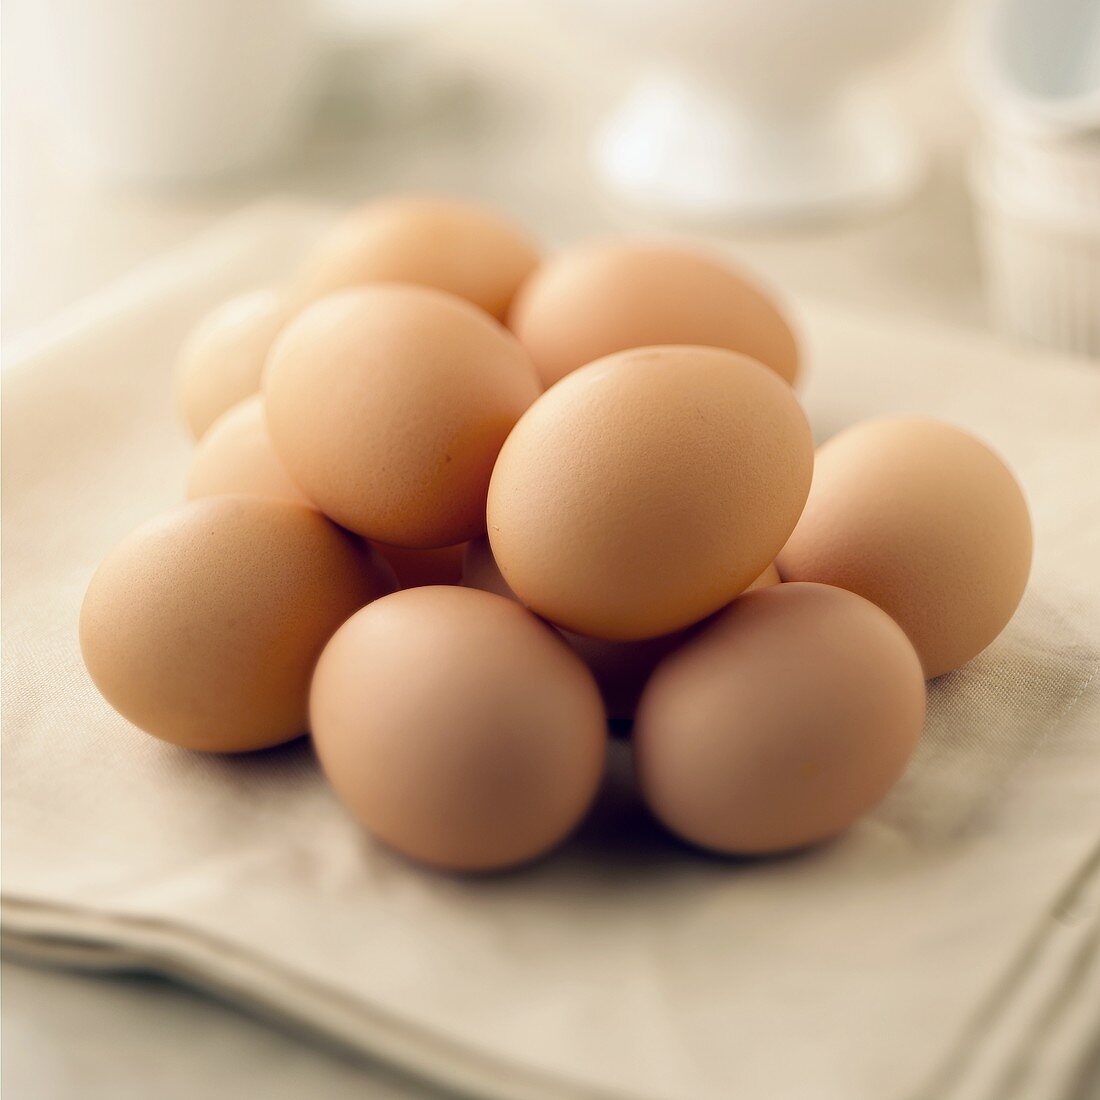 Brown eggs on white cloth